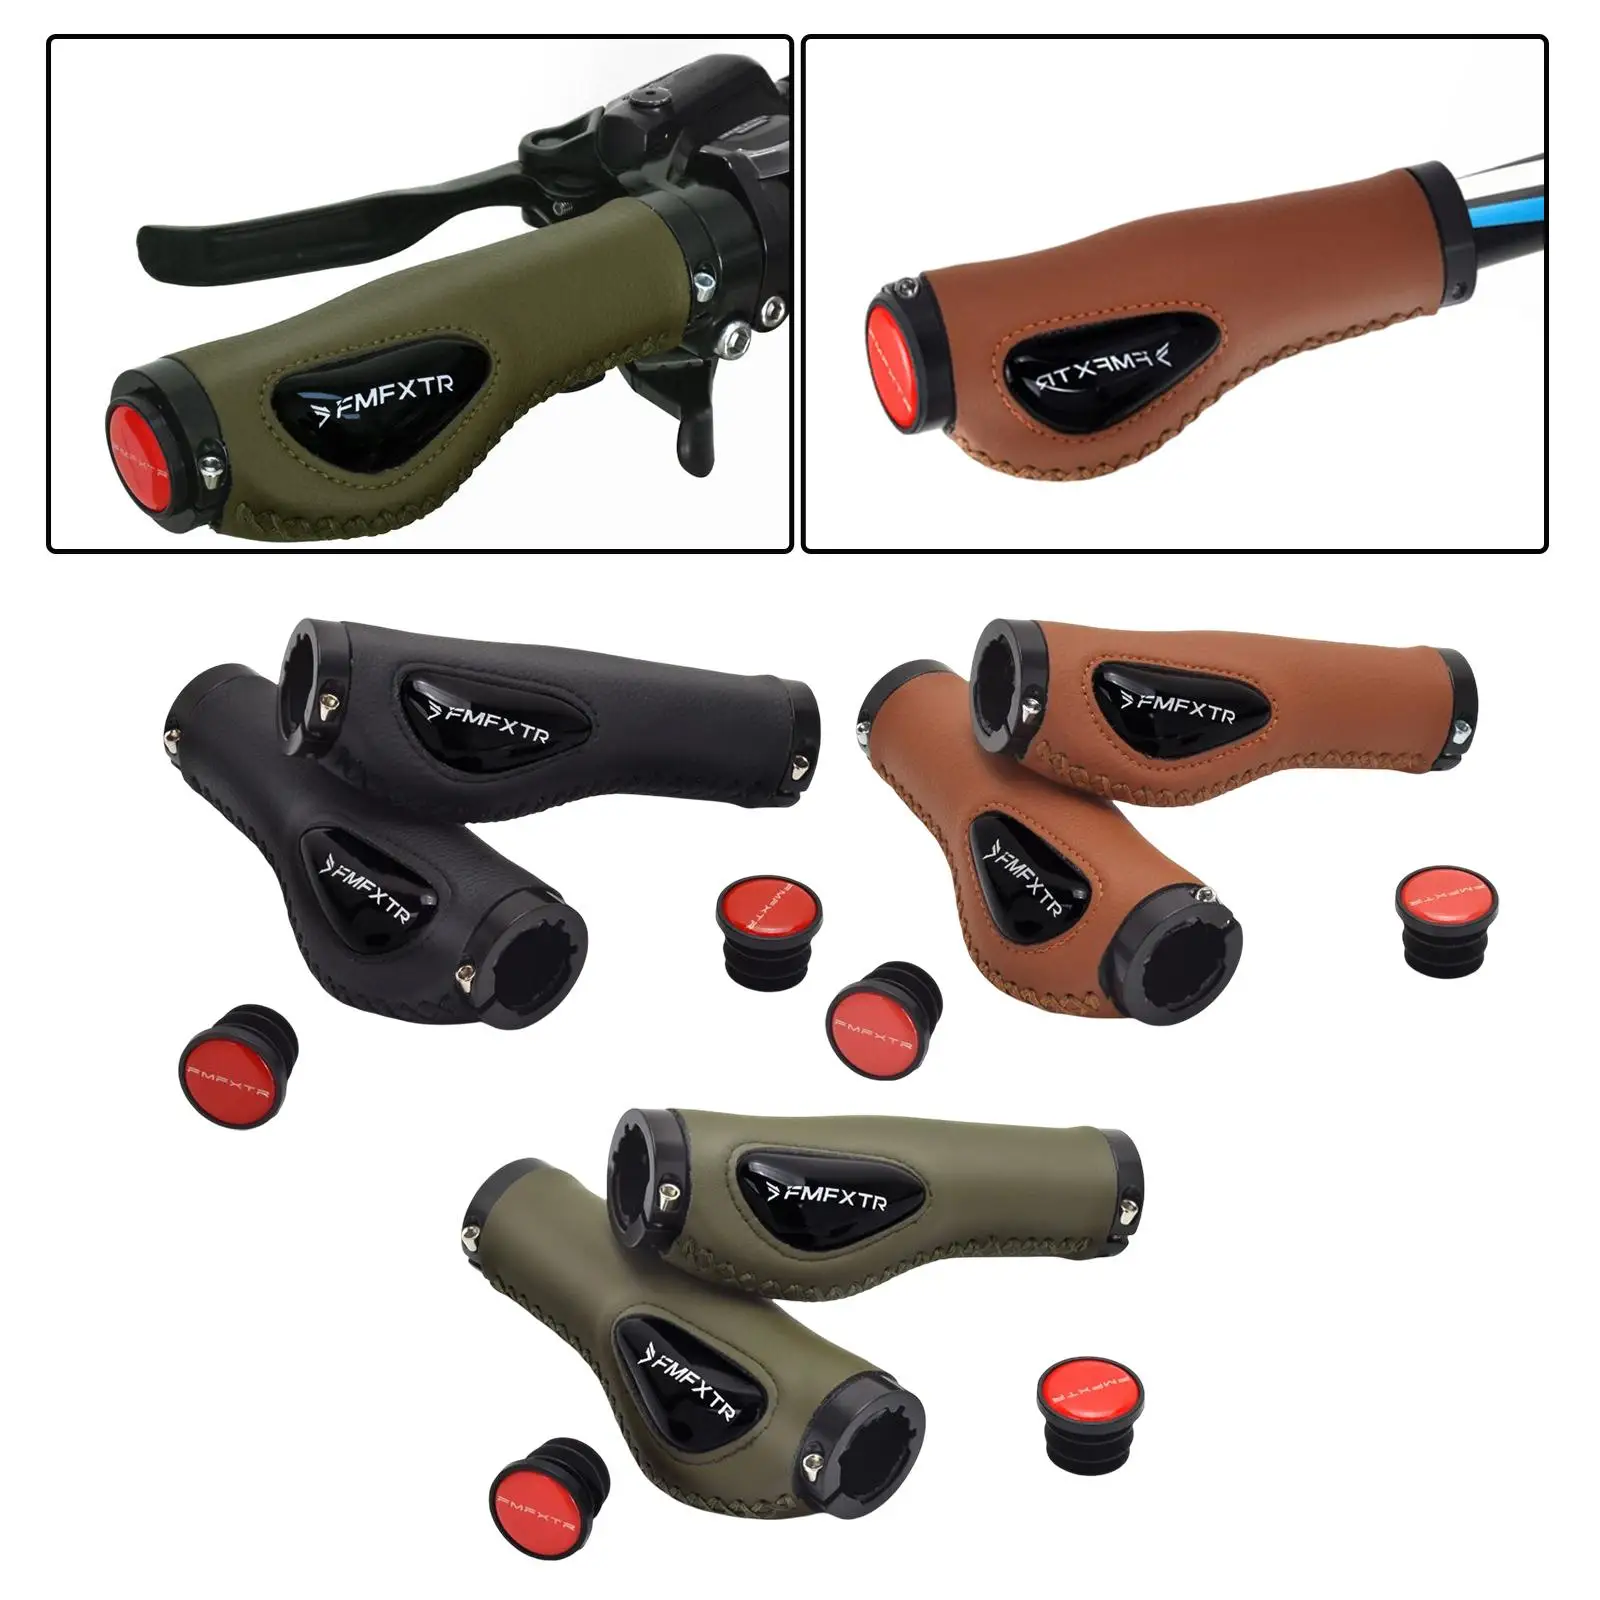 Bike Handle Grips Double Lock Protective Professional Anti Vibration Non Slip Bicycle Handlebar Cover for MTB Outdoor Cycling